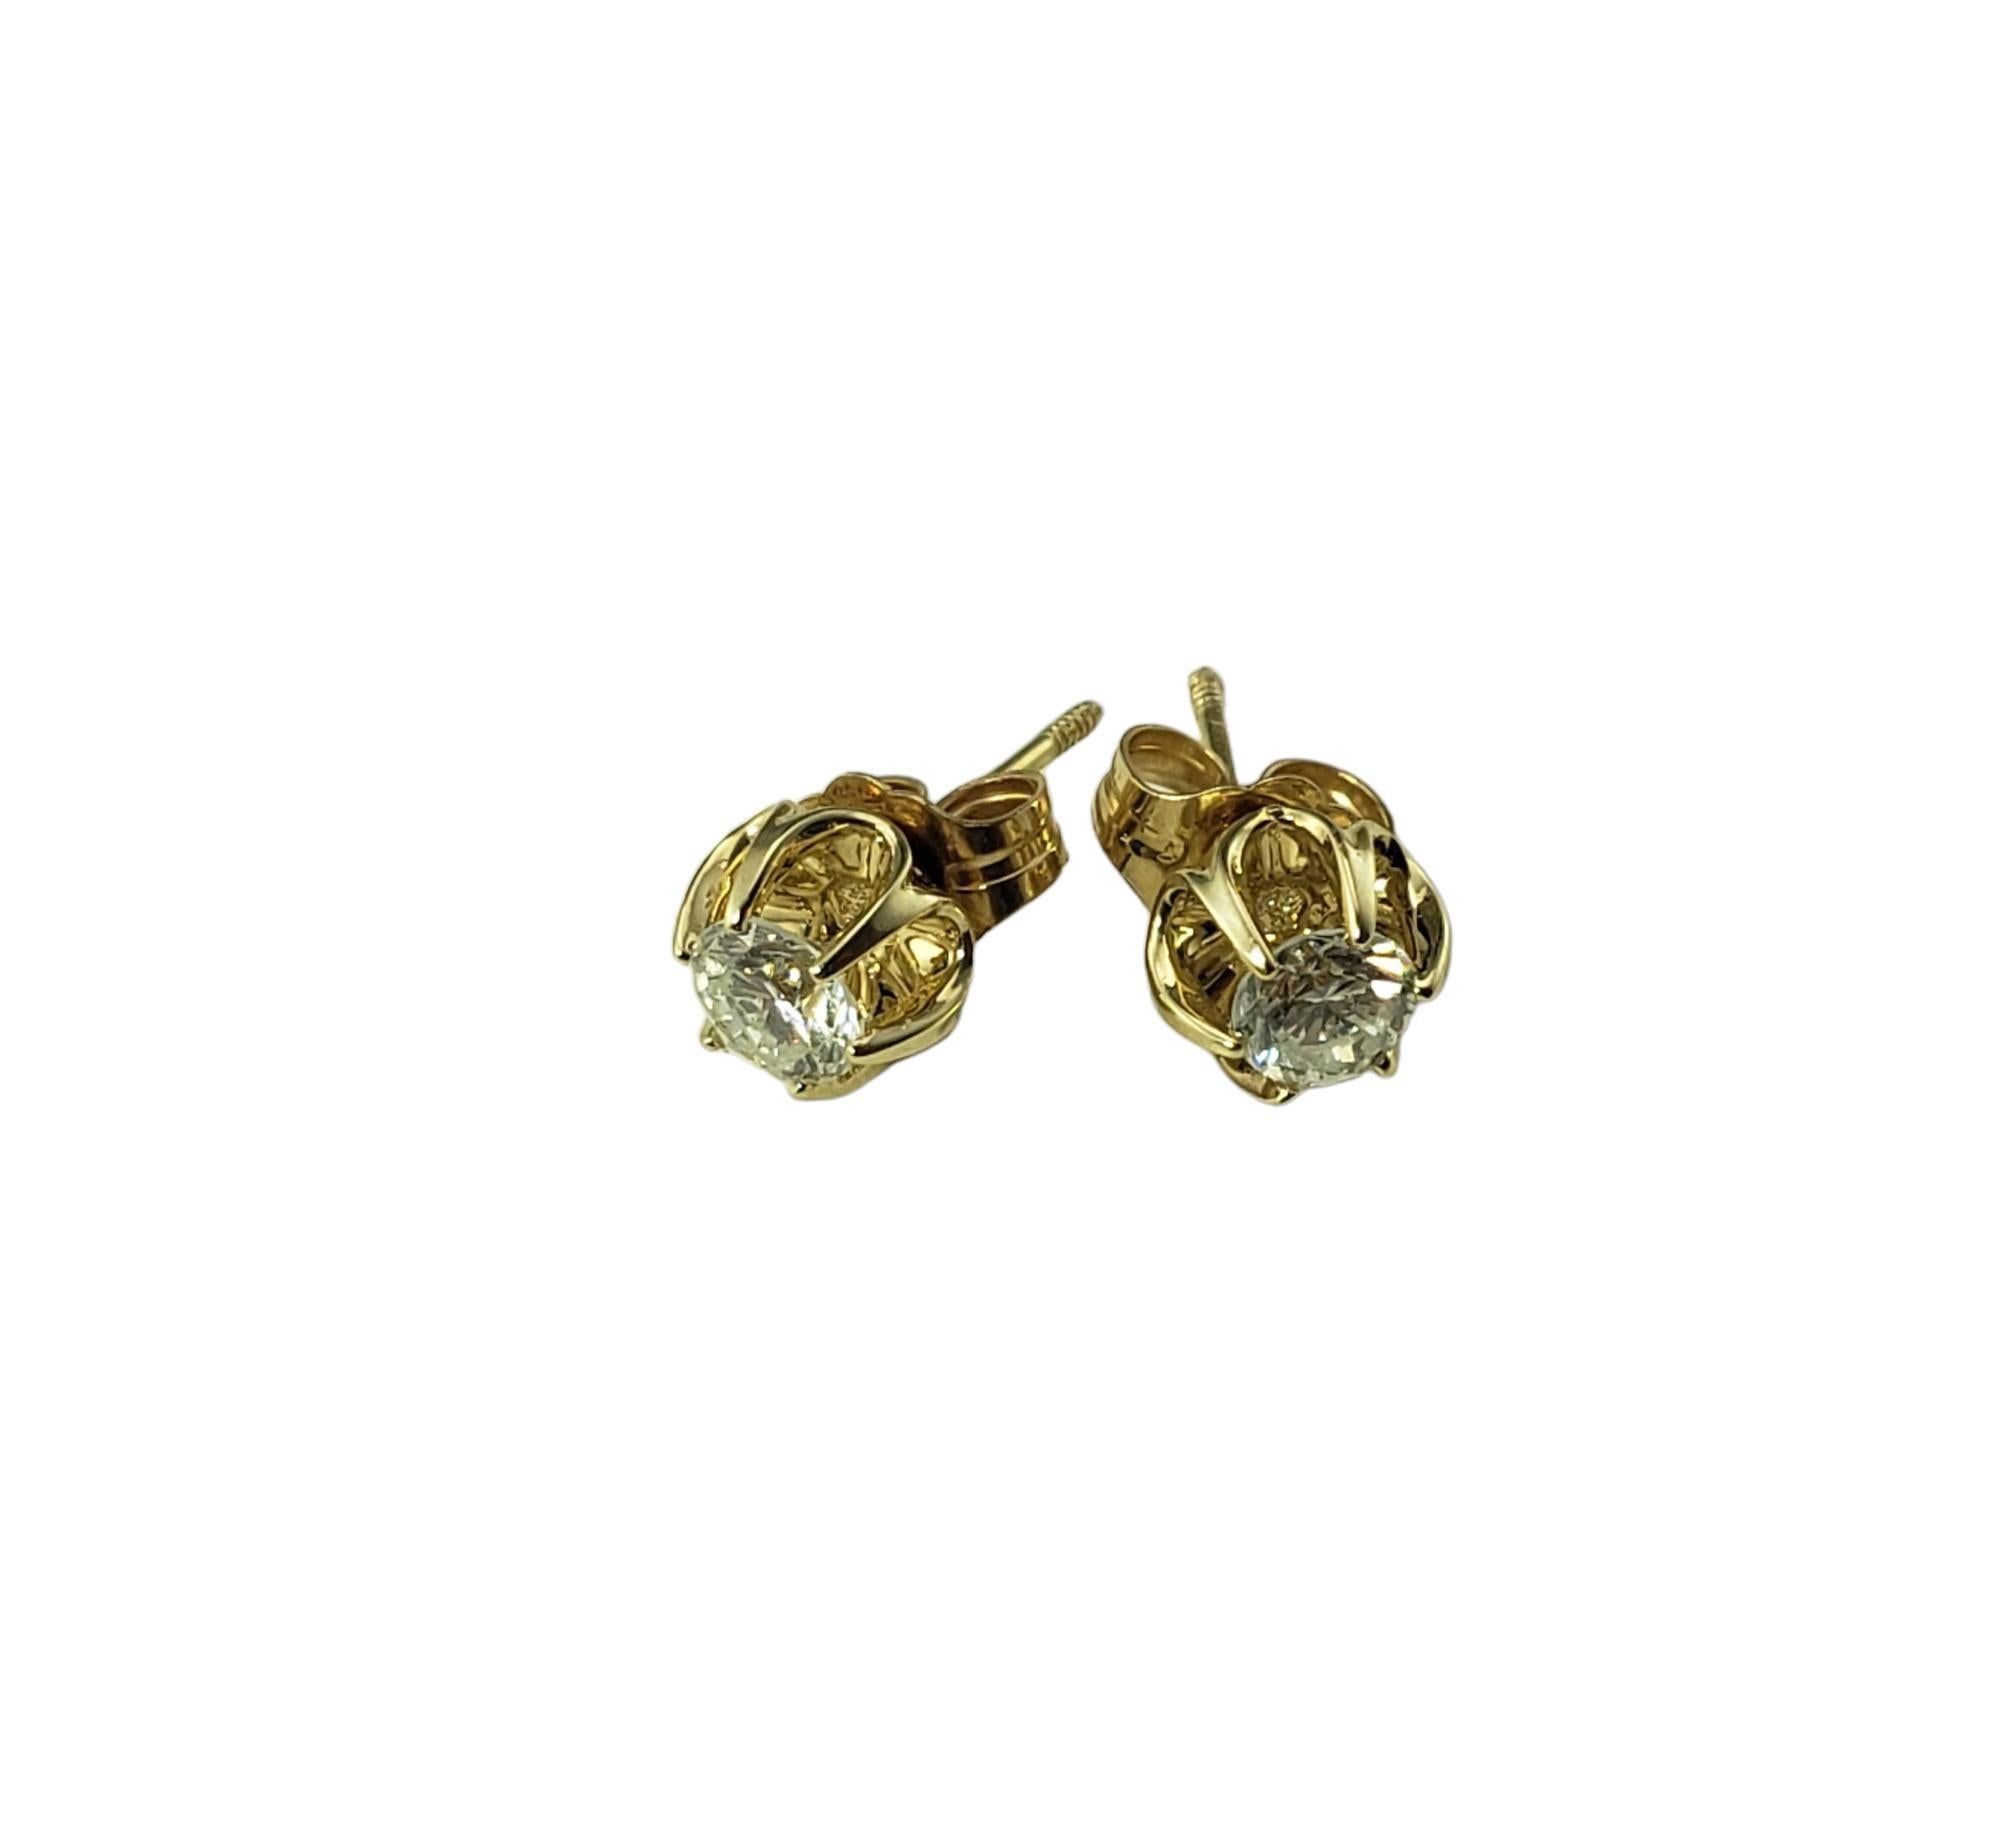 Vintage 14 Karat Yellow Gold Diamond Earrings-

These sparkling stud earrings each feature one round brilliant cut diamond set in beautifully detailed 14K yellow gold.  Screw back closures.

Approximate total diamond weight:  .40 ct.

Diamond